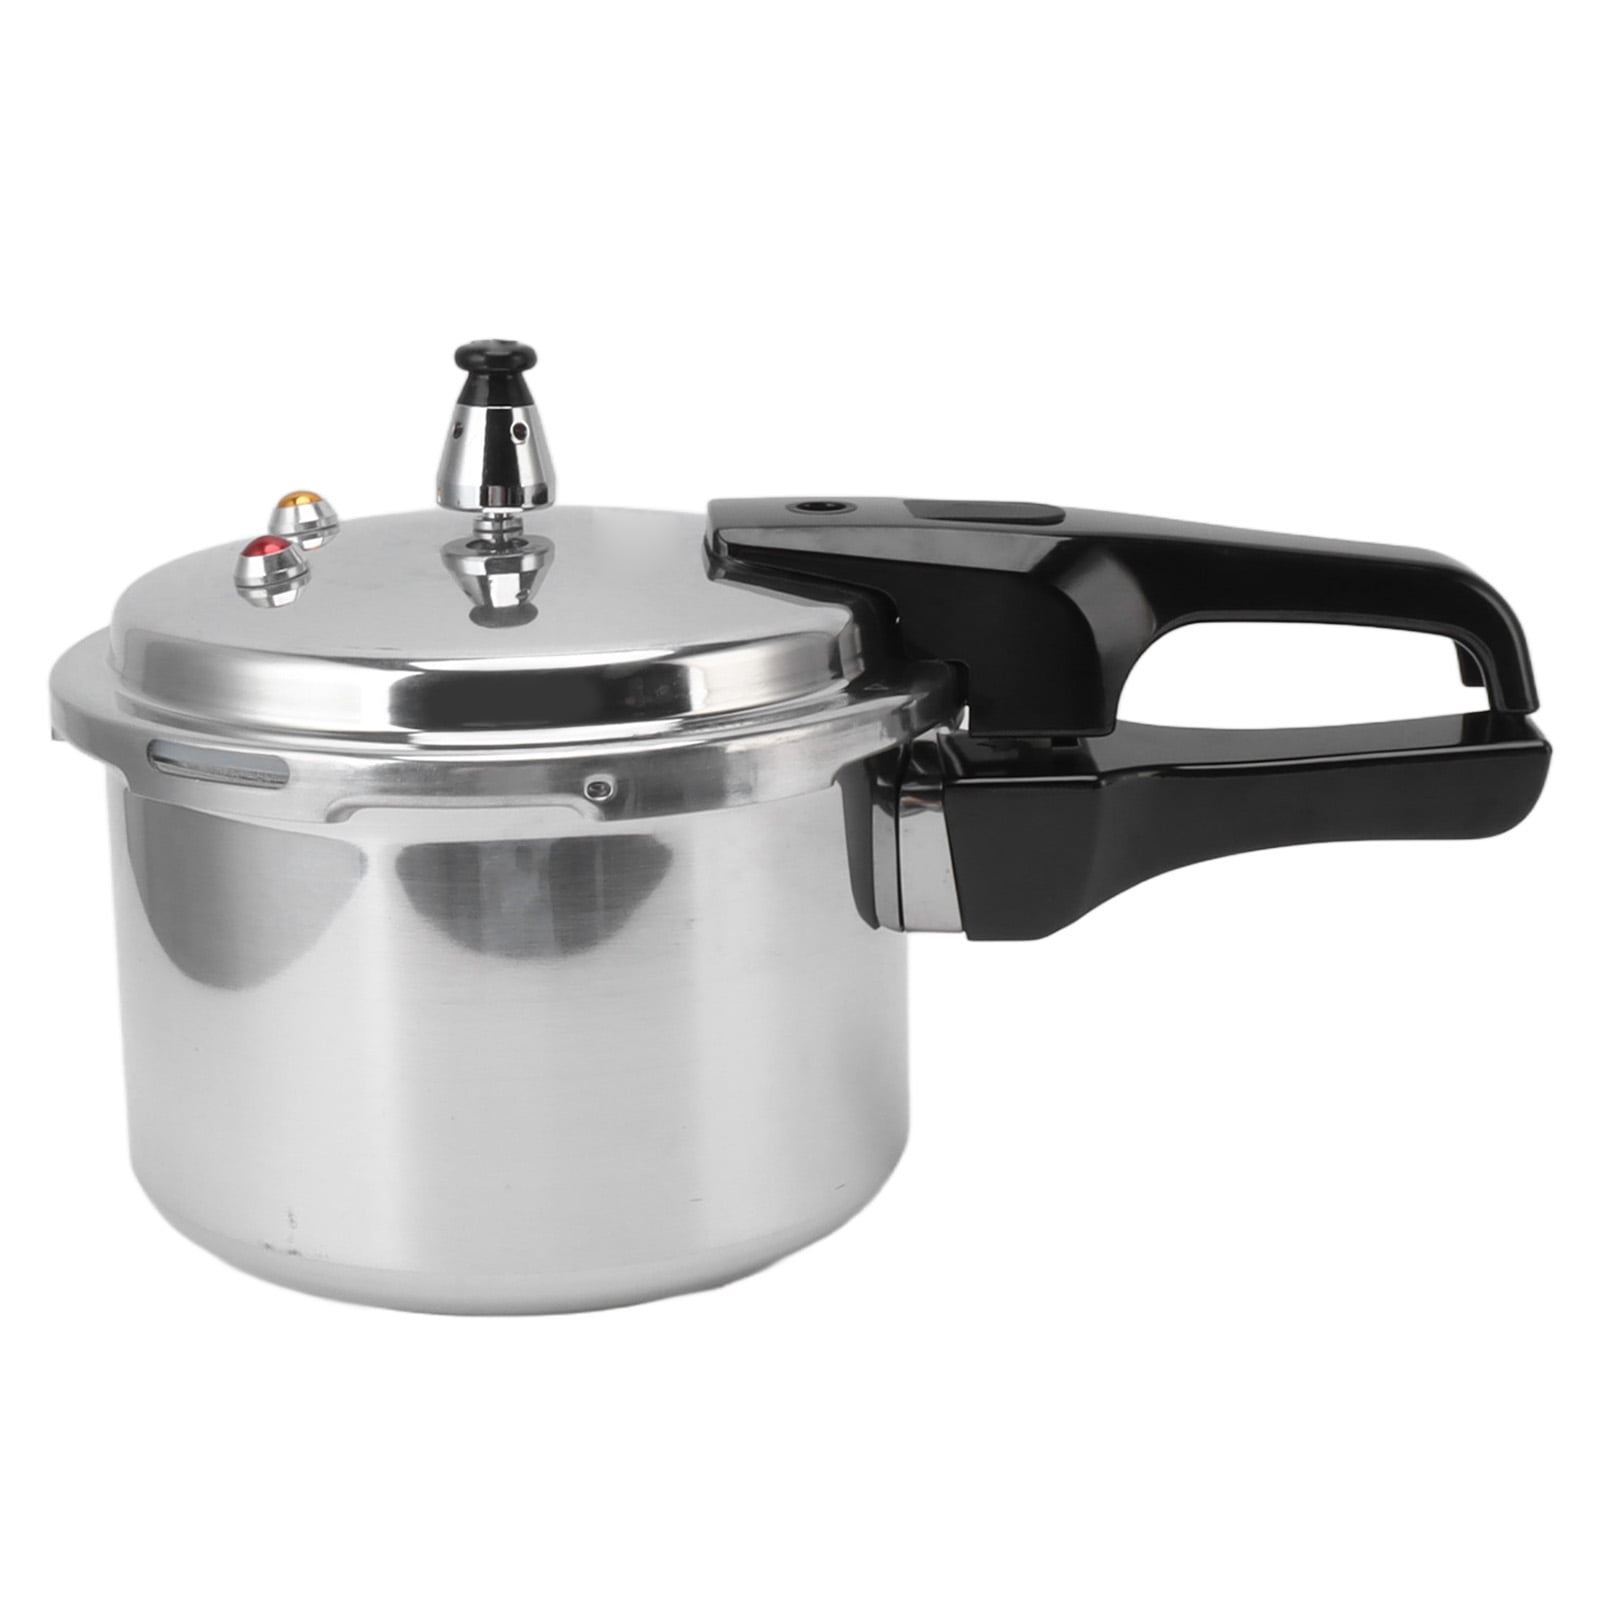 12-Quart Stainless Steel Pressure Cooker Classic series - Silver